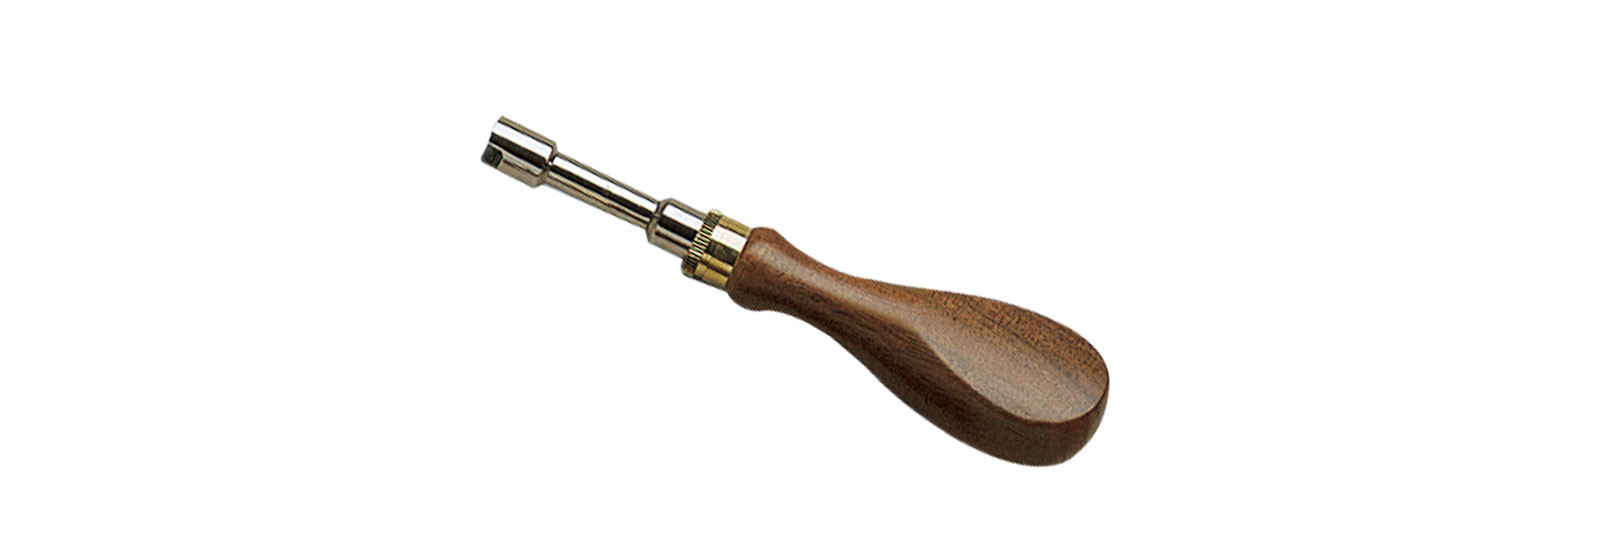 Nipple wrench for revolver with wooden handle